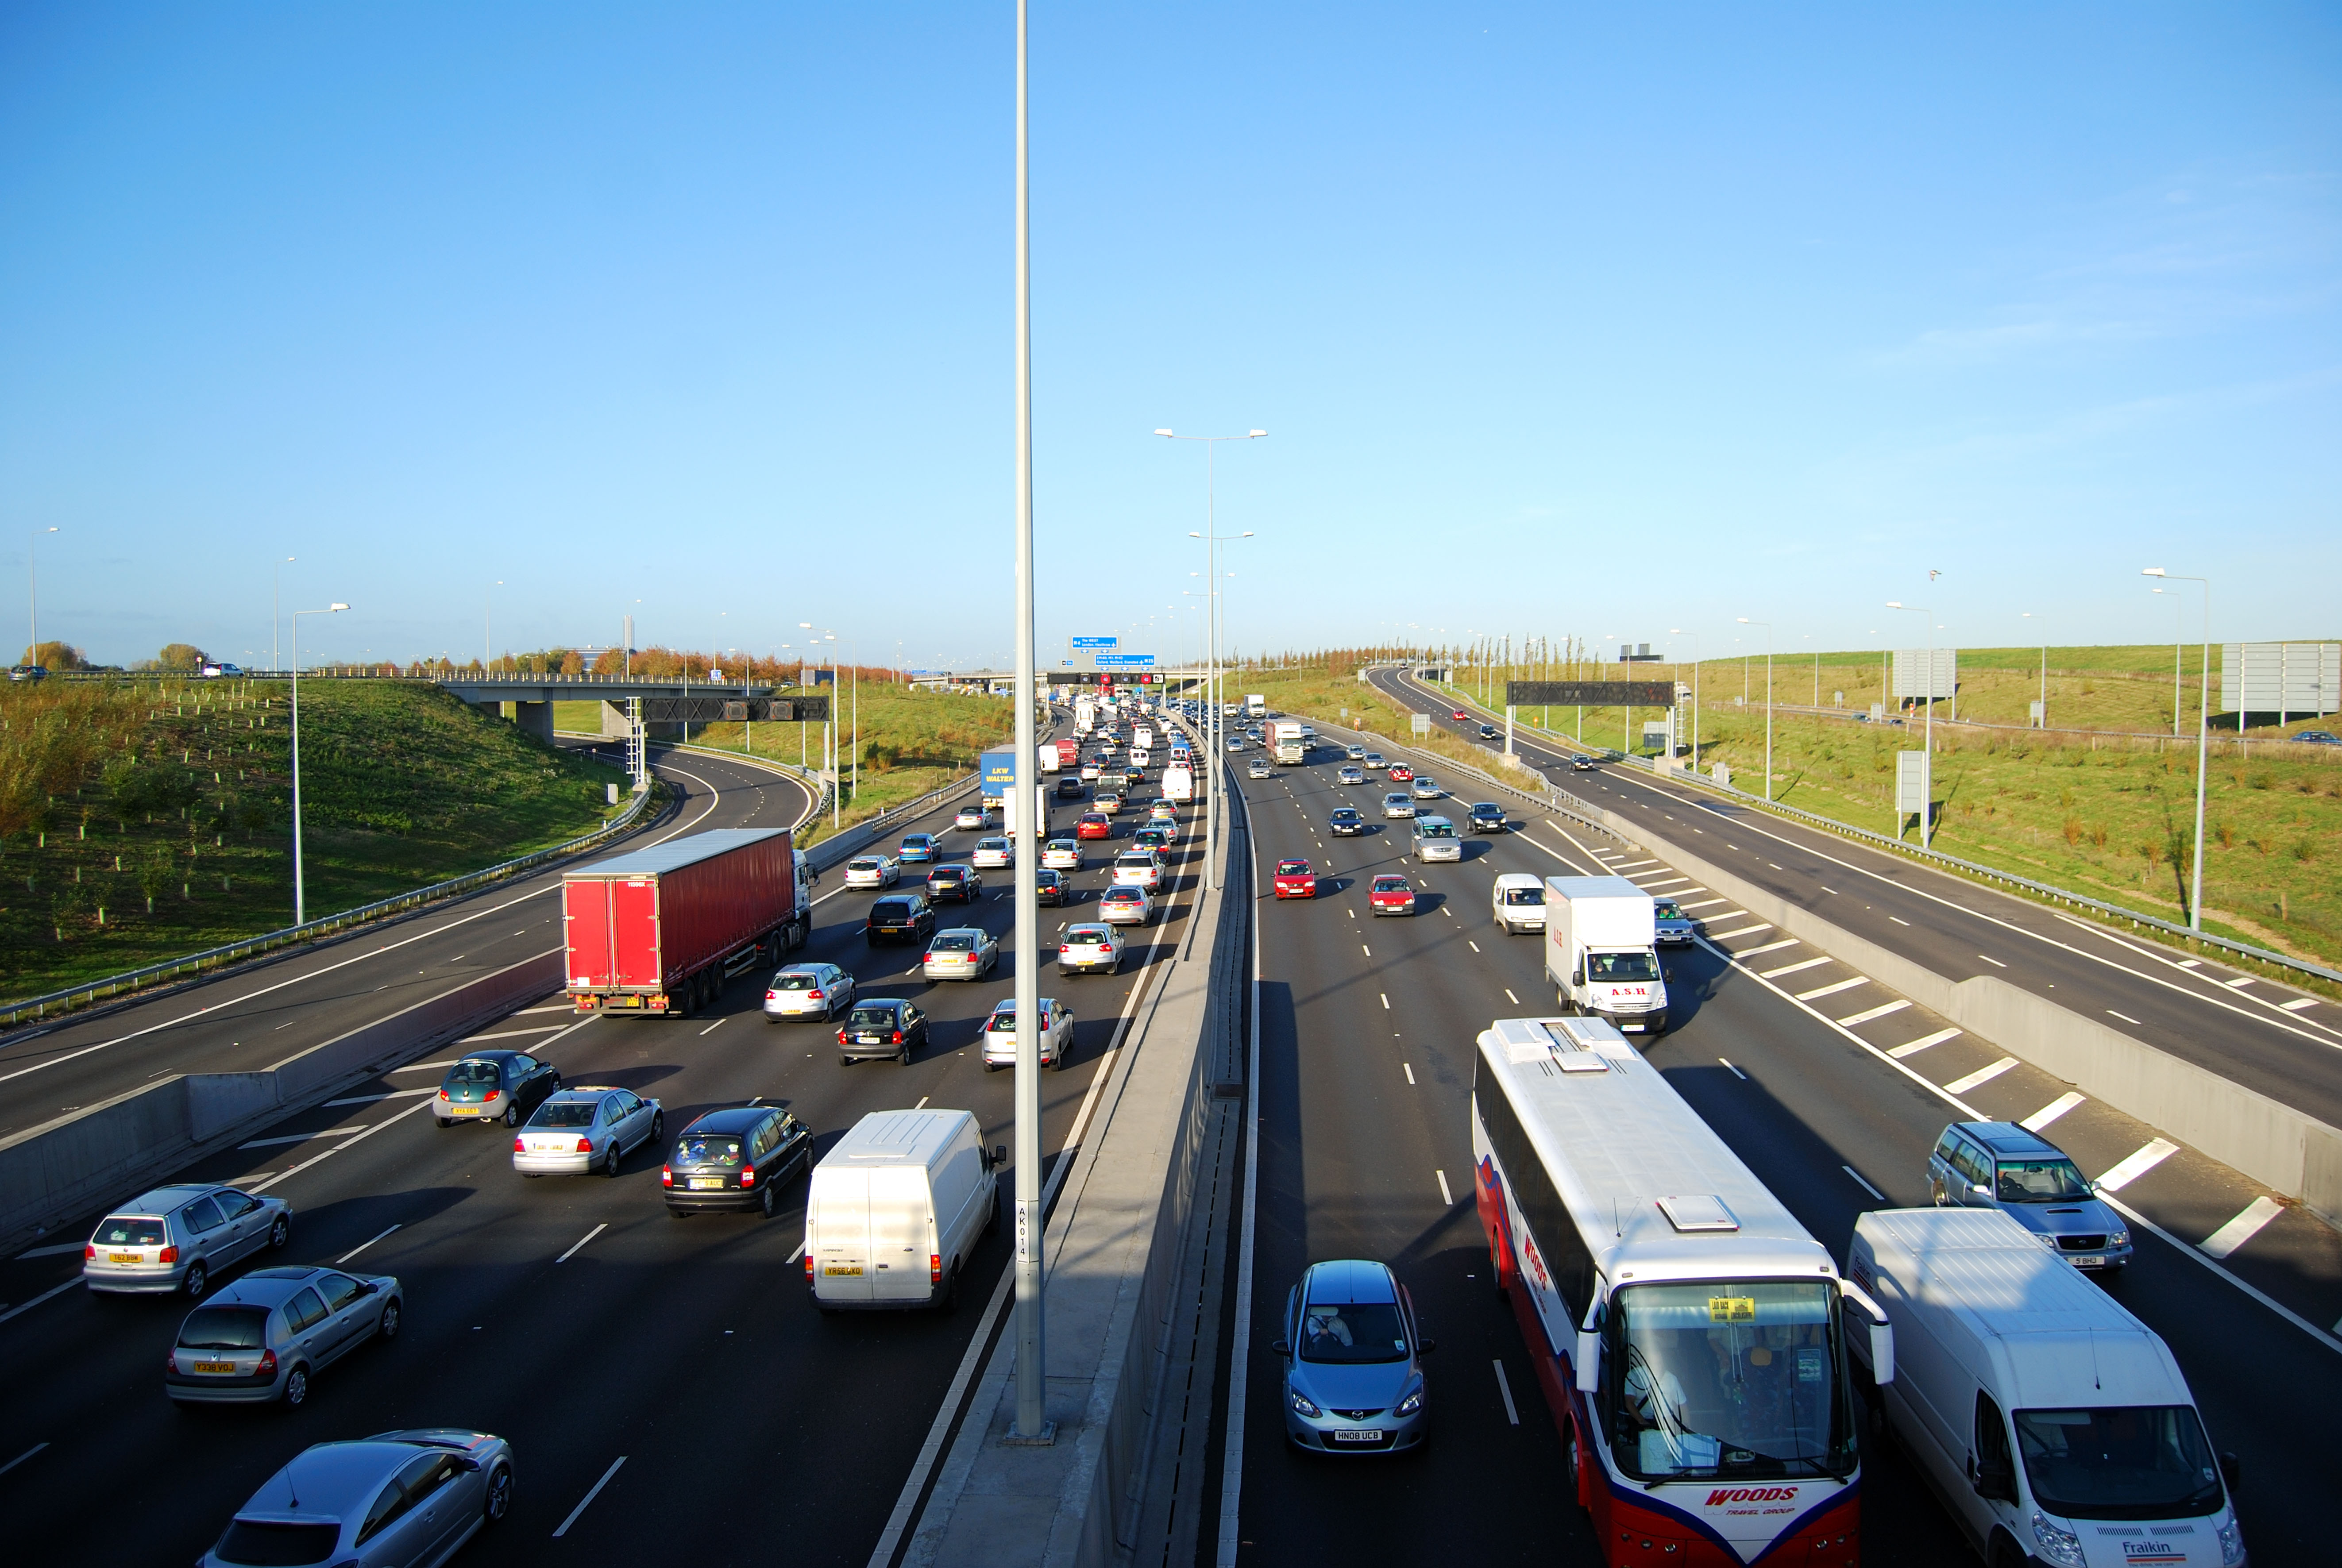 Congested M25 Motorway at Junction 14, Greater London, England, United Kingdom. Image shot 2008. Exact date unknown.